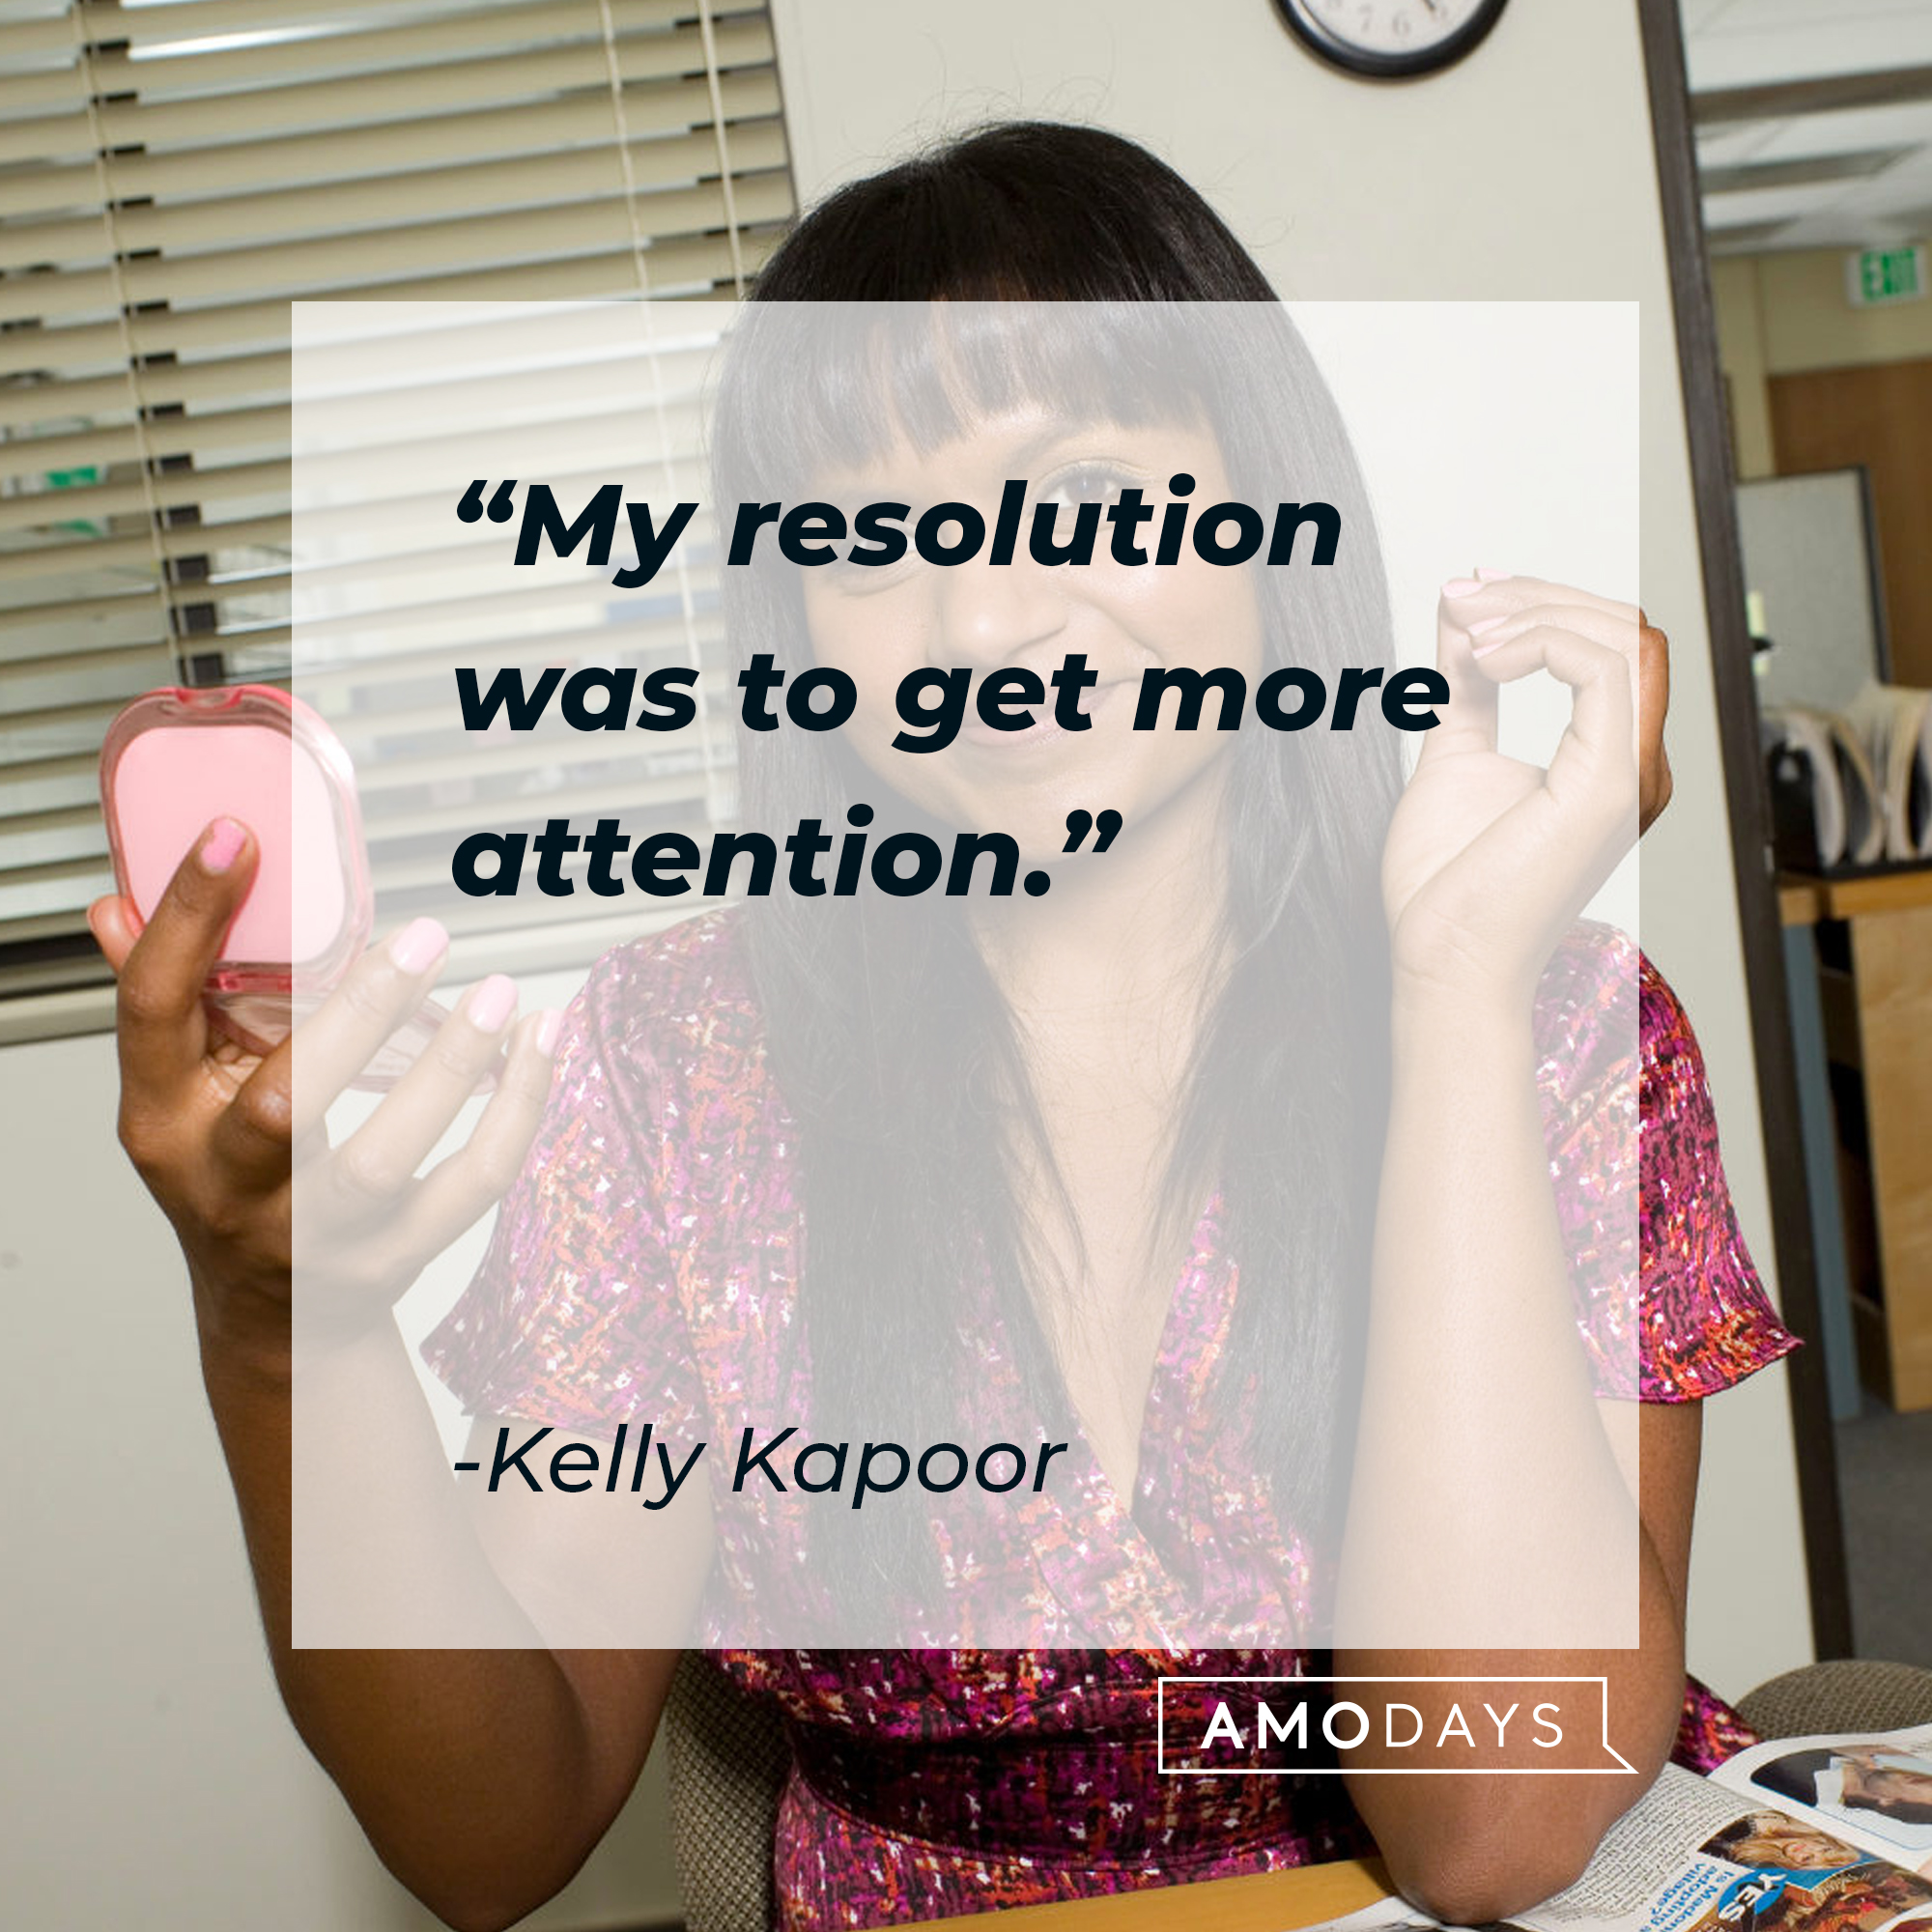 Kelly Kapoor's quote: "My resolution was to get more attention." | Source: facebook.com/TheOfficeTV